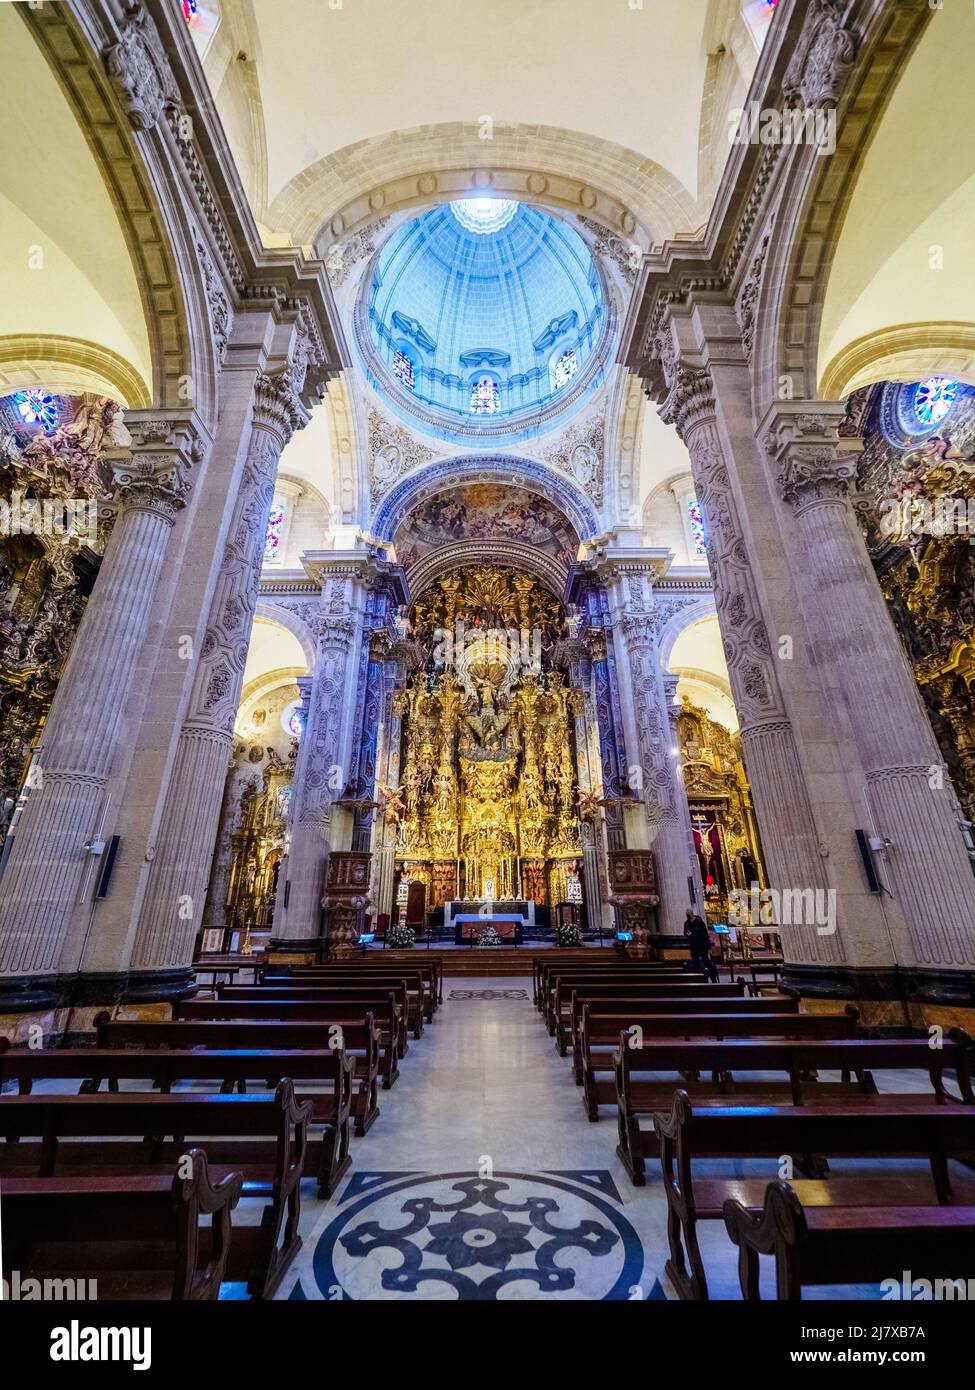 Central nave and the main altarpiece of the Collegiate Church of the Divine Savior - Seville, Spain Stock Photo